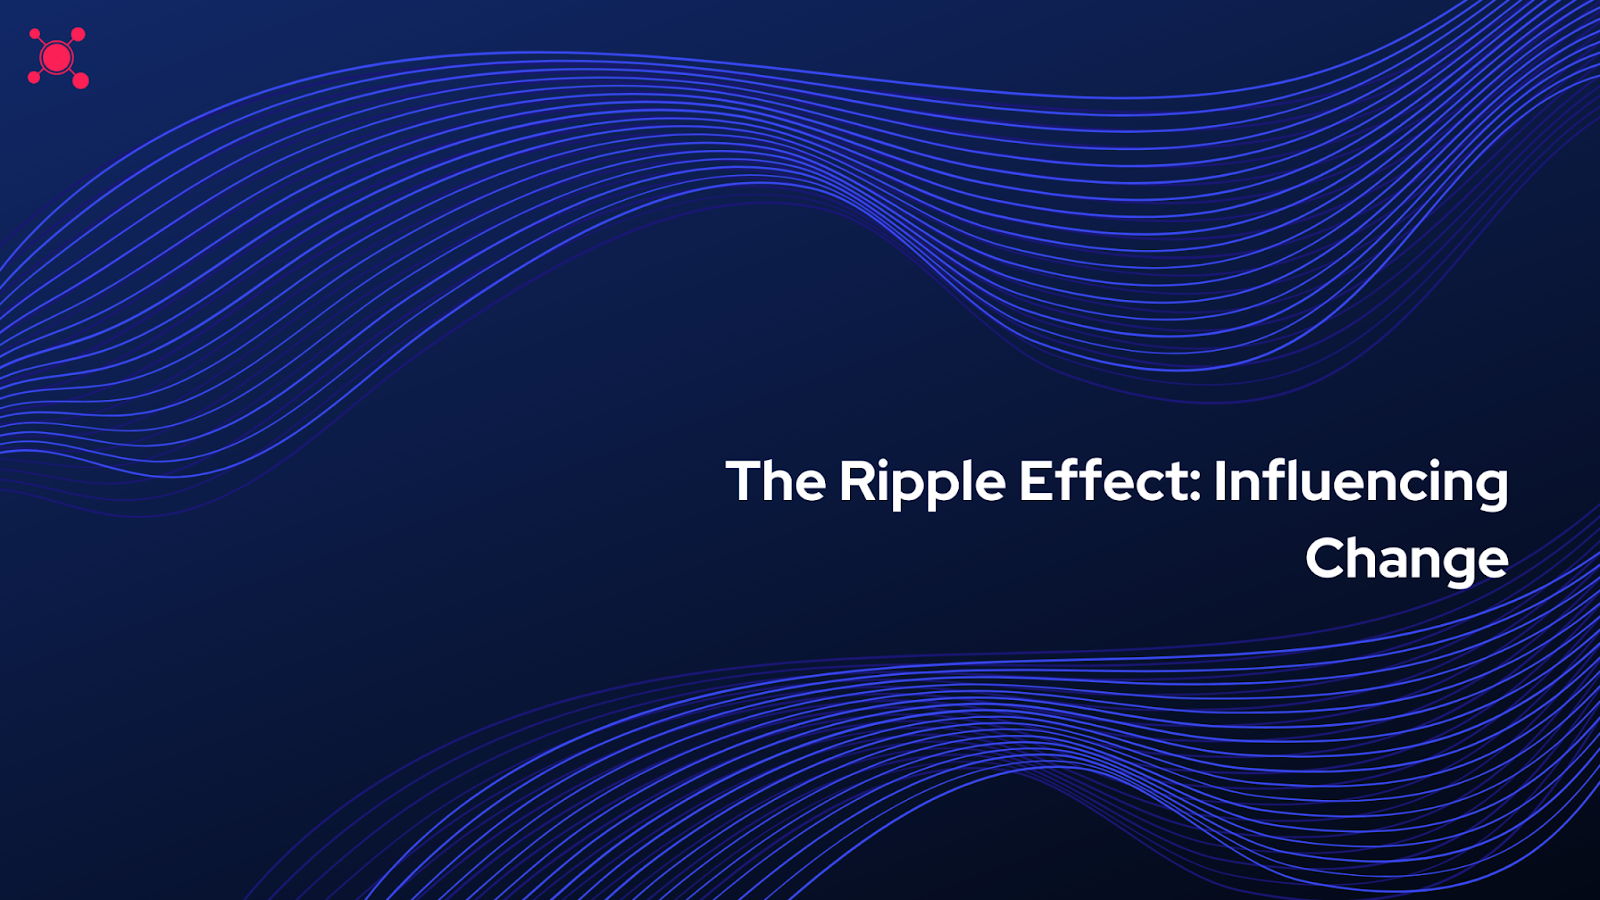 The Ripple Effect: Influencing Change with Decentralized Social Media - A Title Image with a Focus on the Evolution of Social Media towards Decentralization.